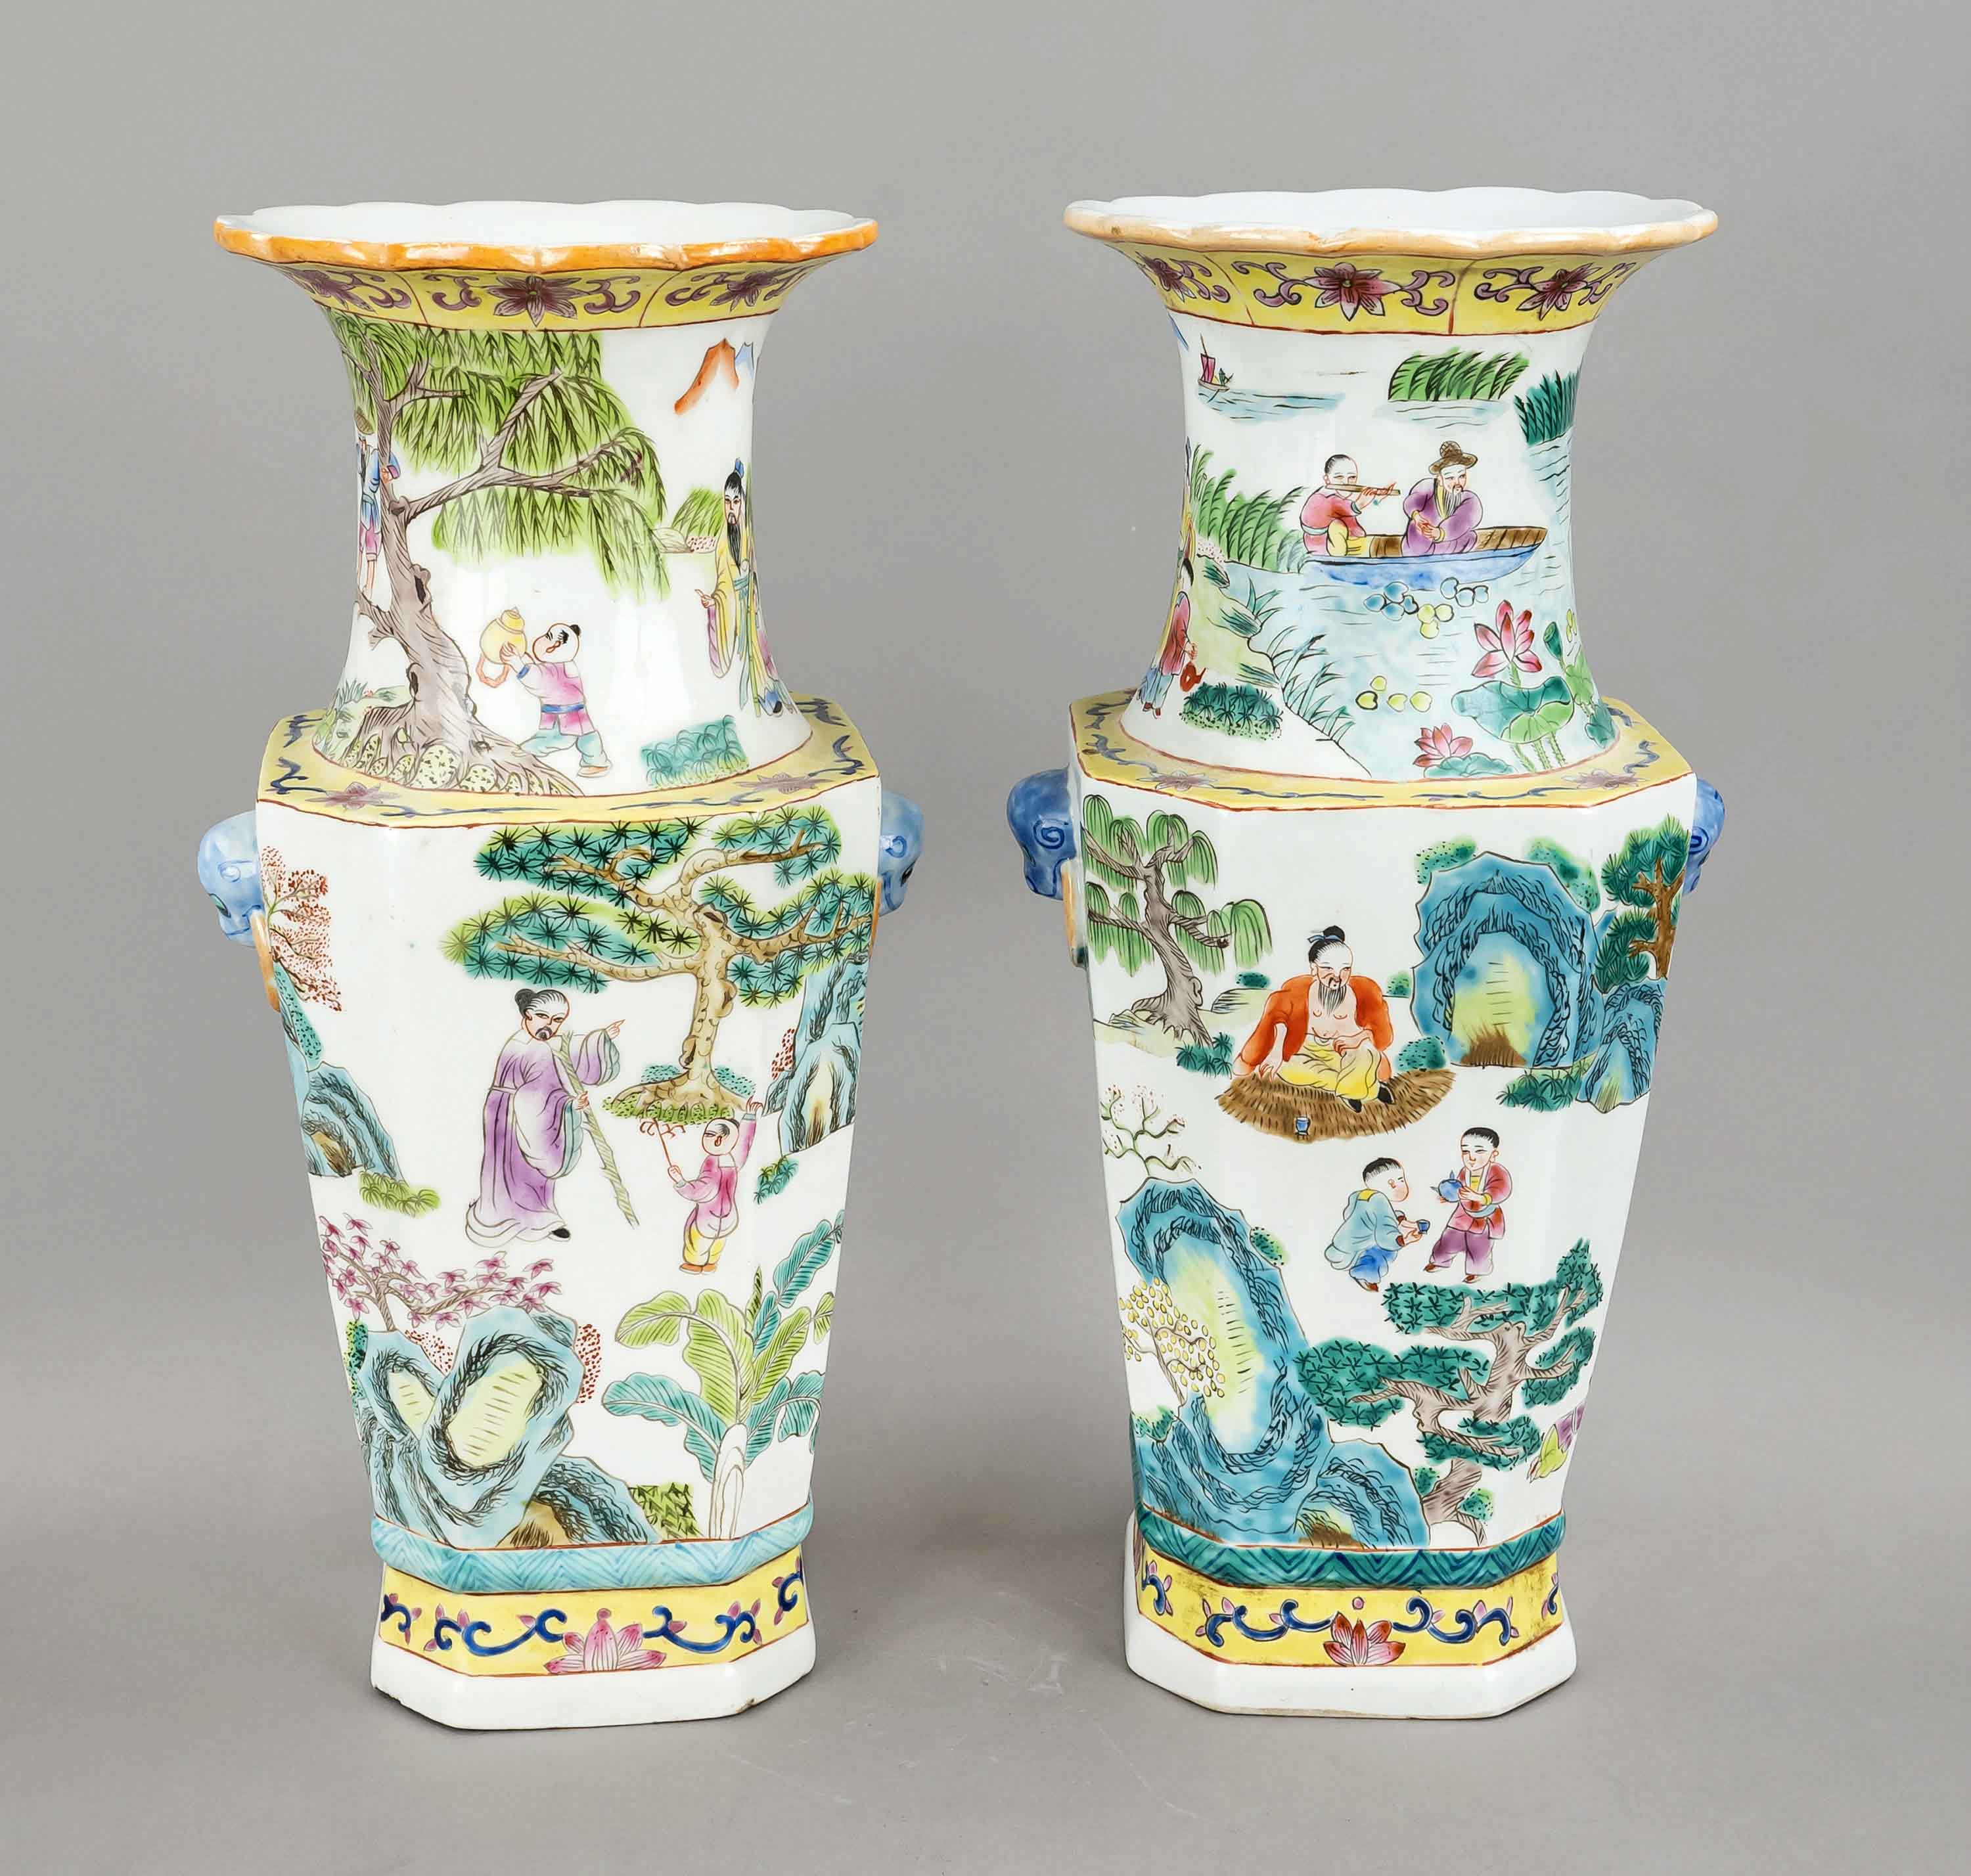 Pair of large vases, China, 20th century, porcelain with polychrome glaze decoration in famille-rose